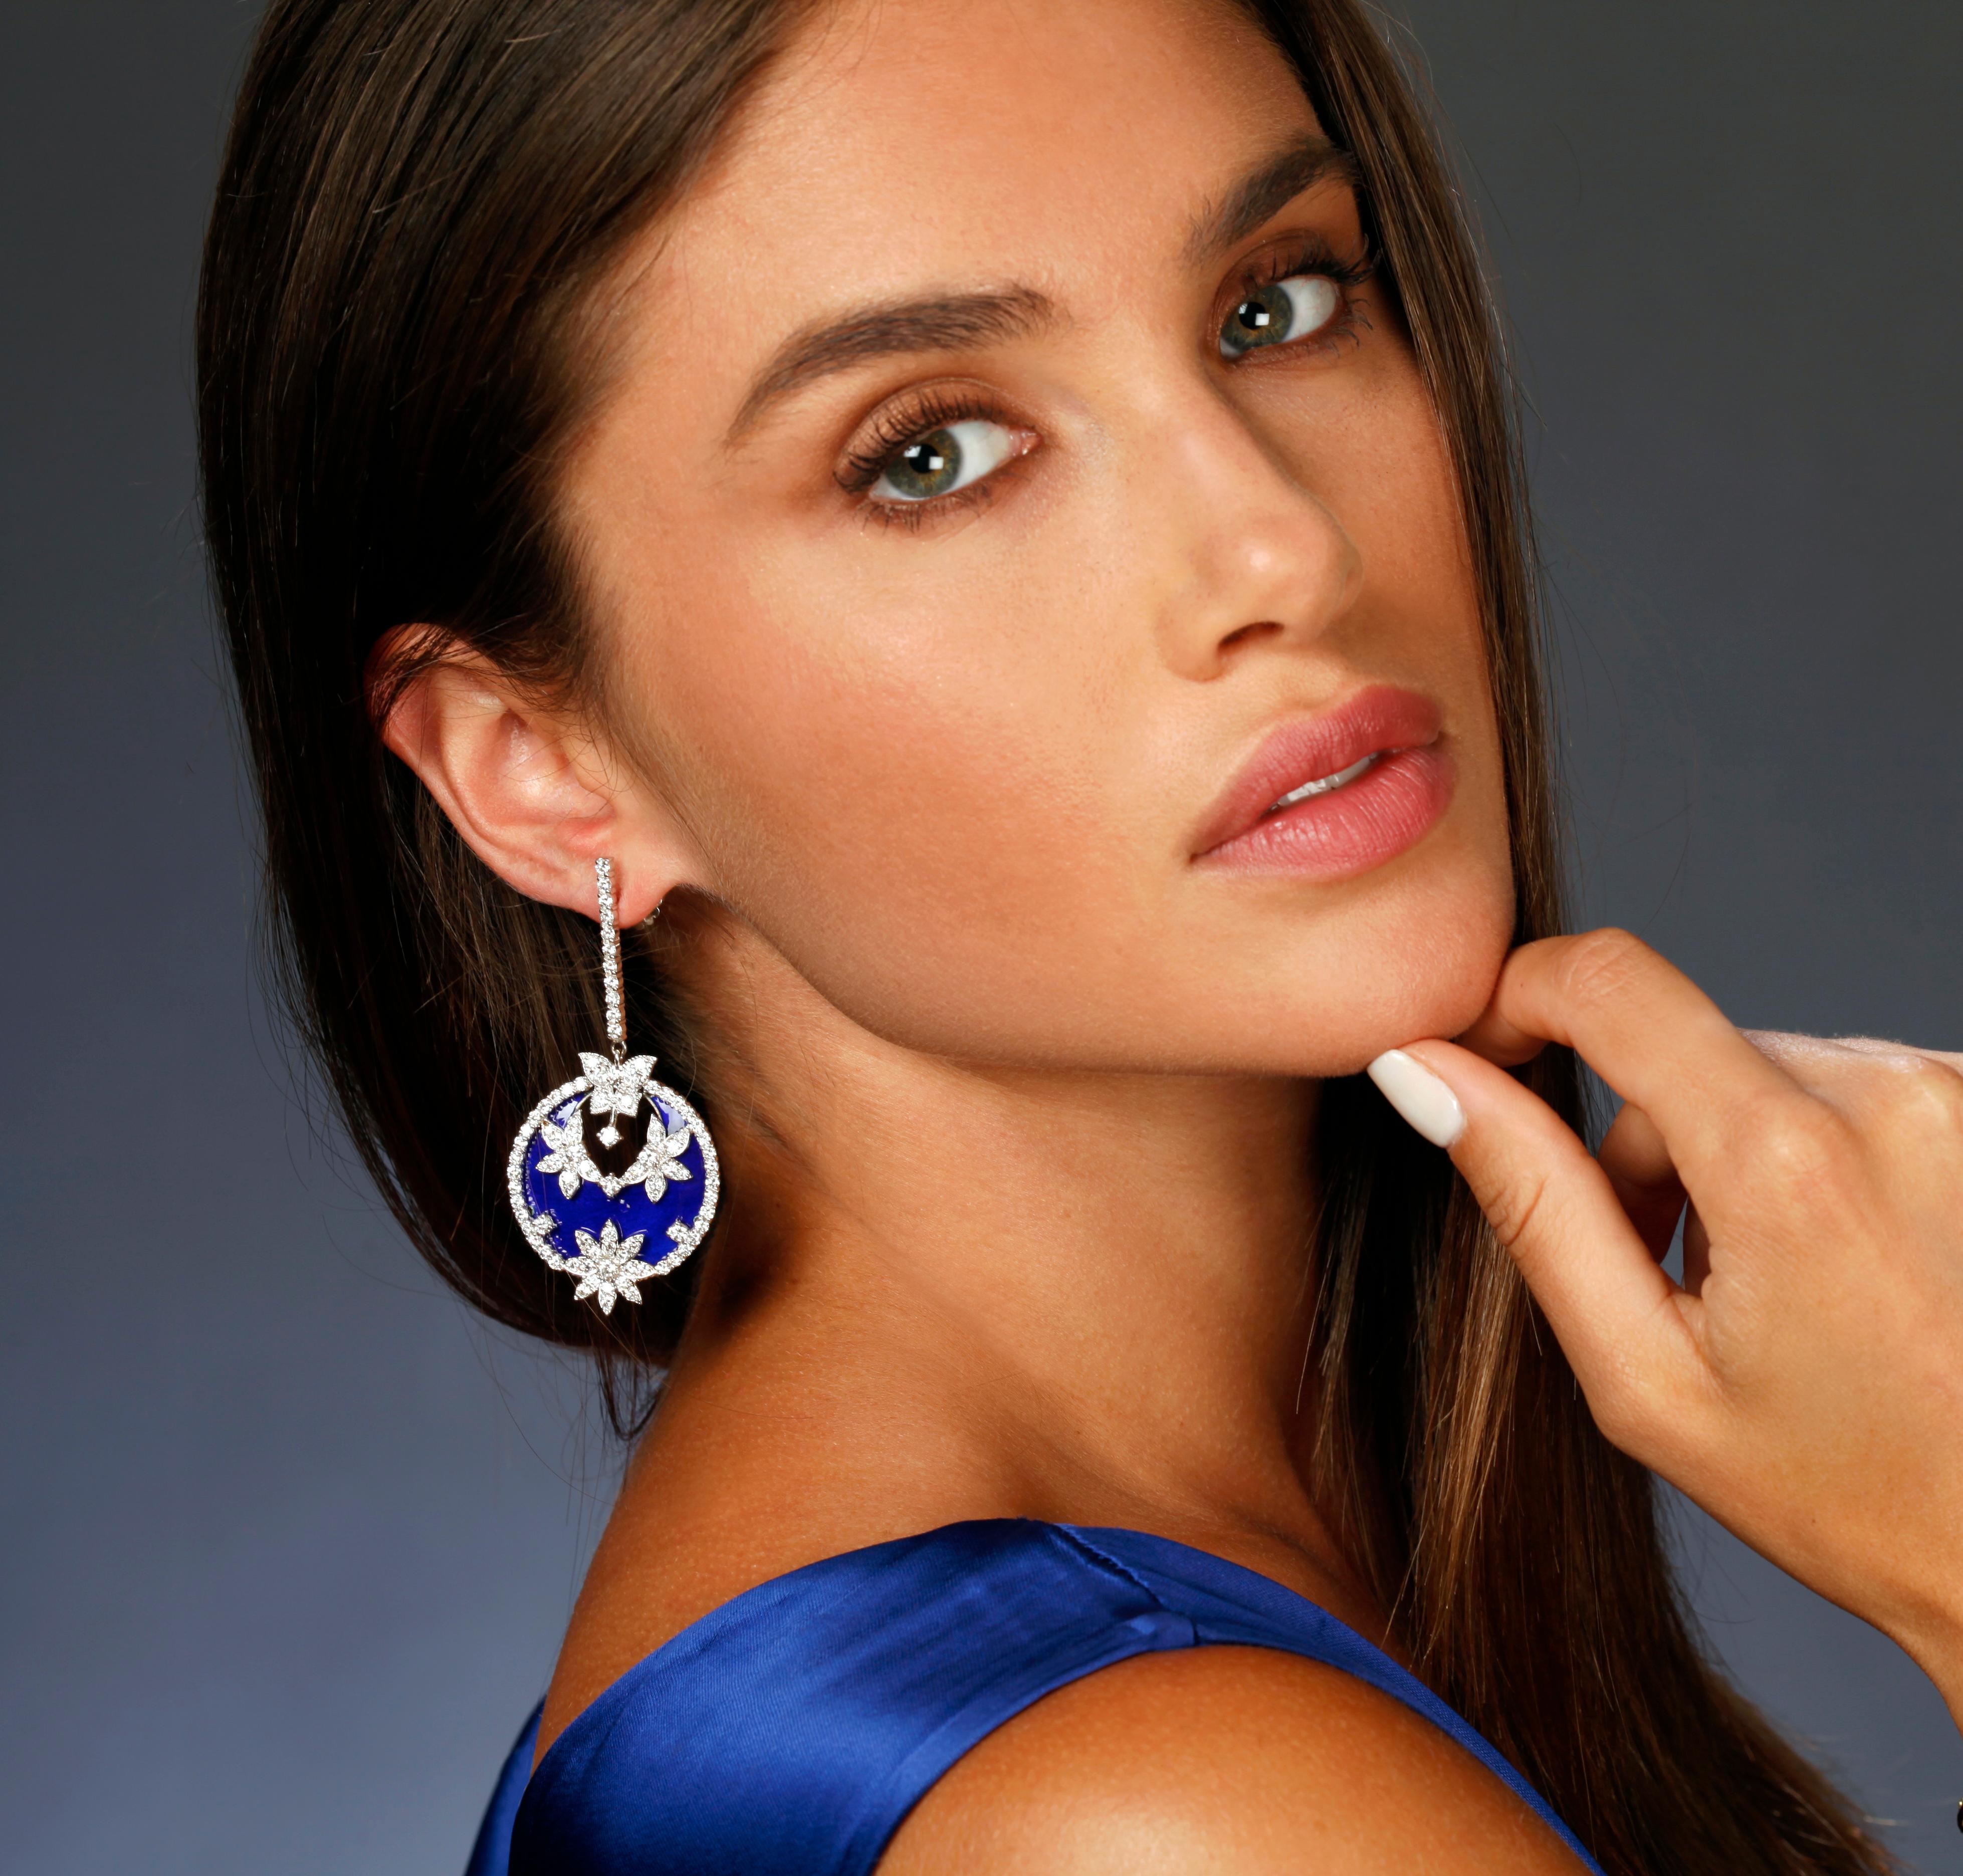 18K White Gold Cobalt Blue Enamel Floral and Butterfly Diamond Earrings by Stambolian

These state-of-the-art earrings by Stambolian are truly remarkable in design and quality. The drops signify a unique take on the ordinary by combining everyday